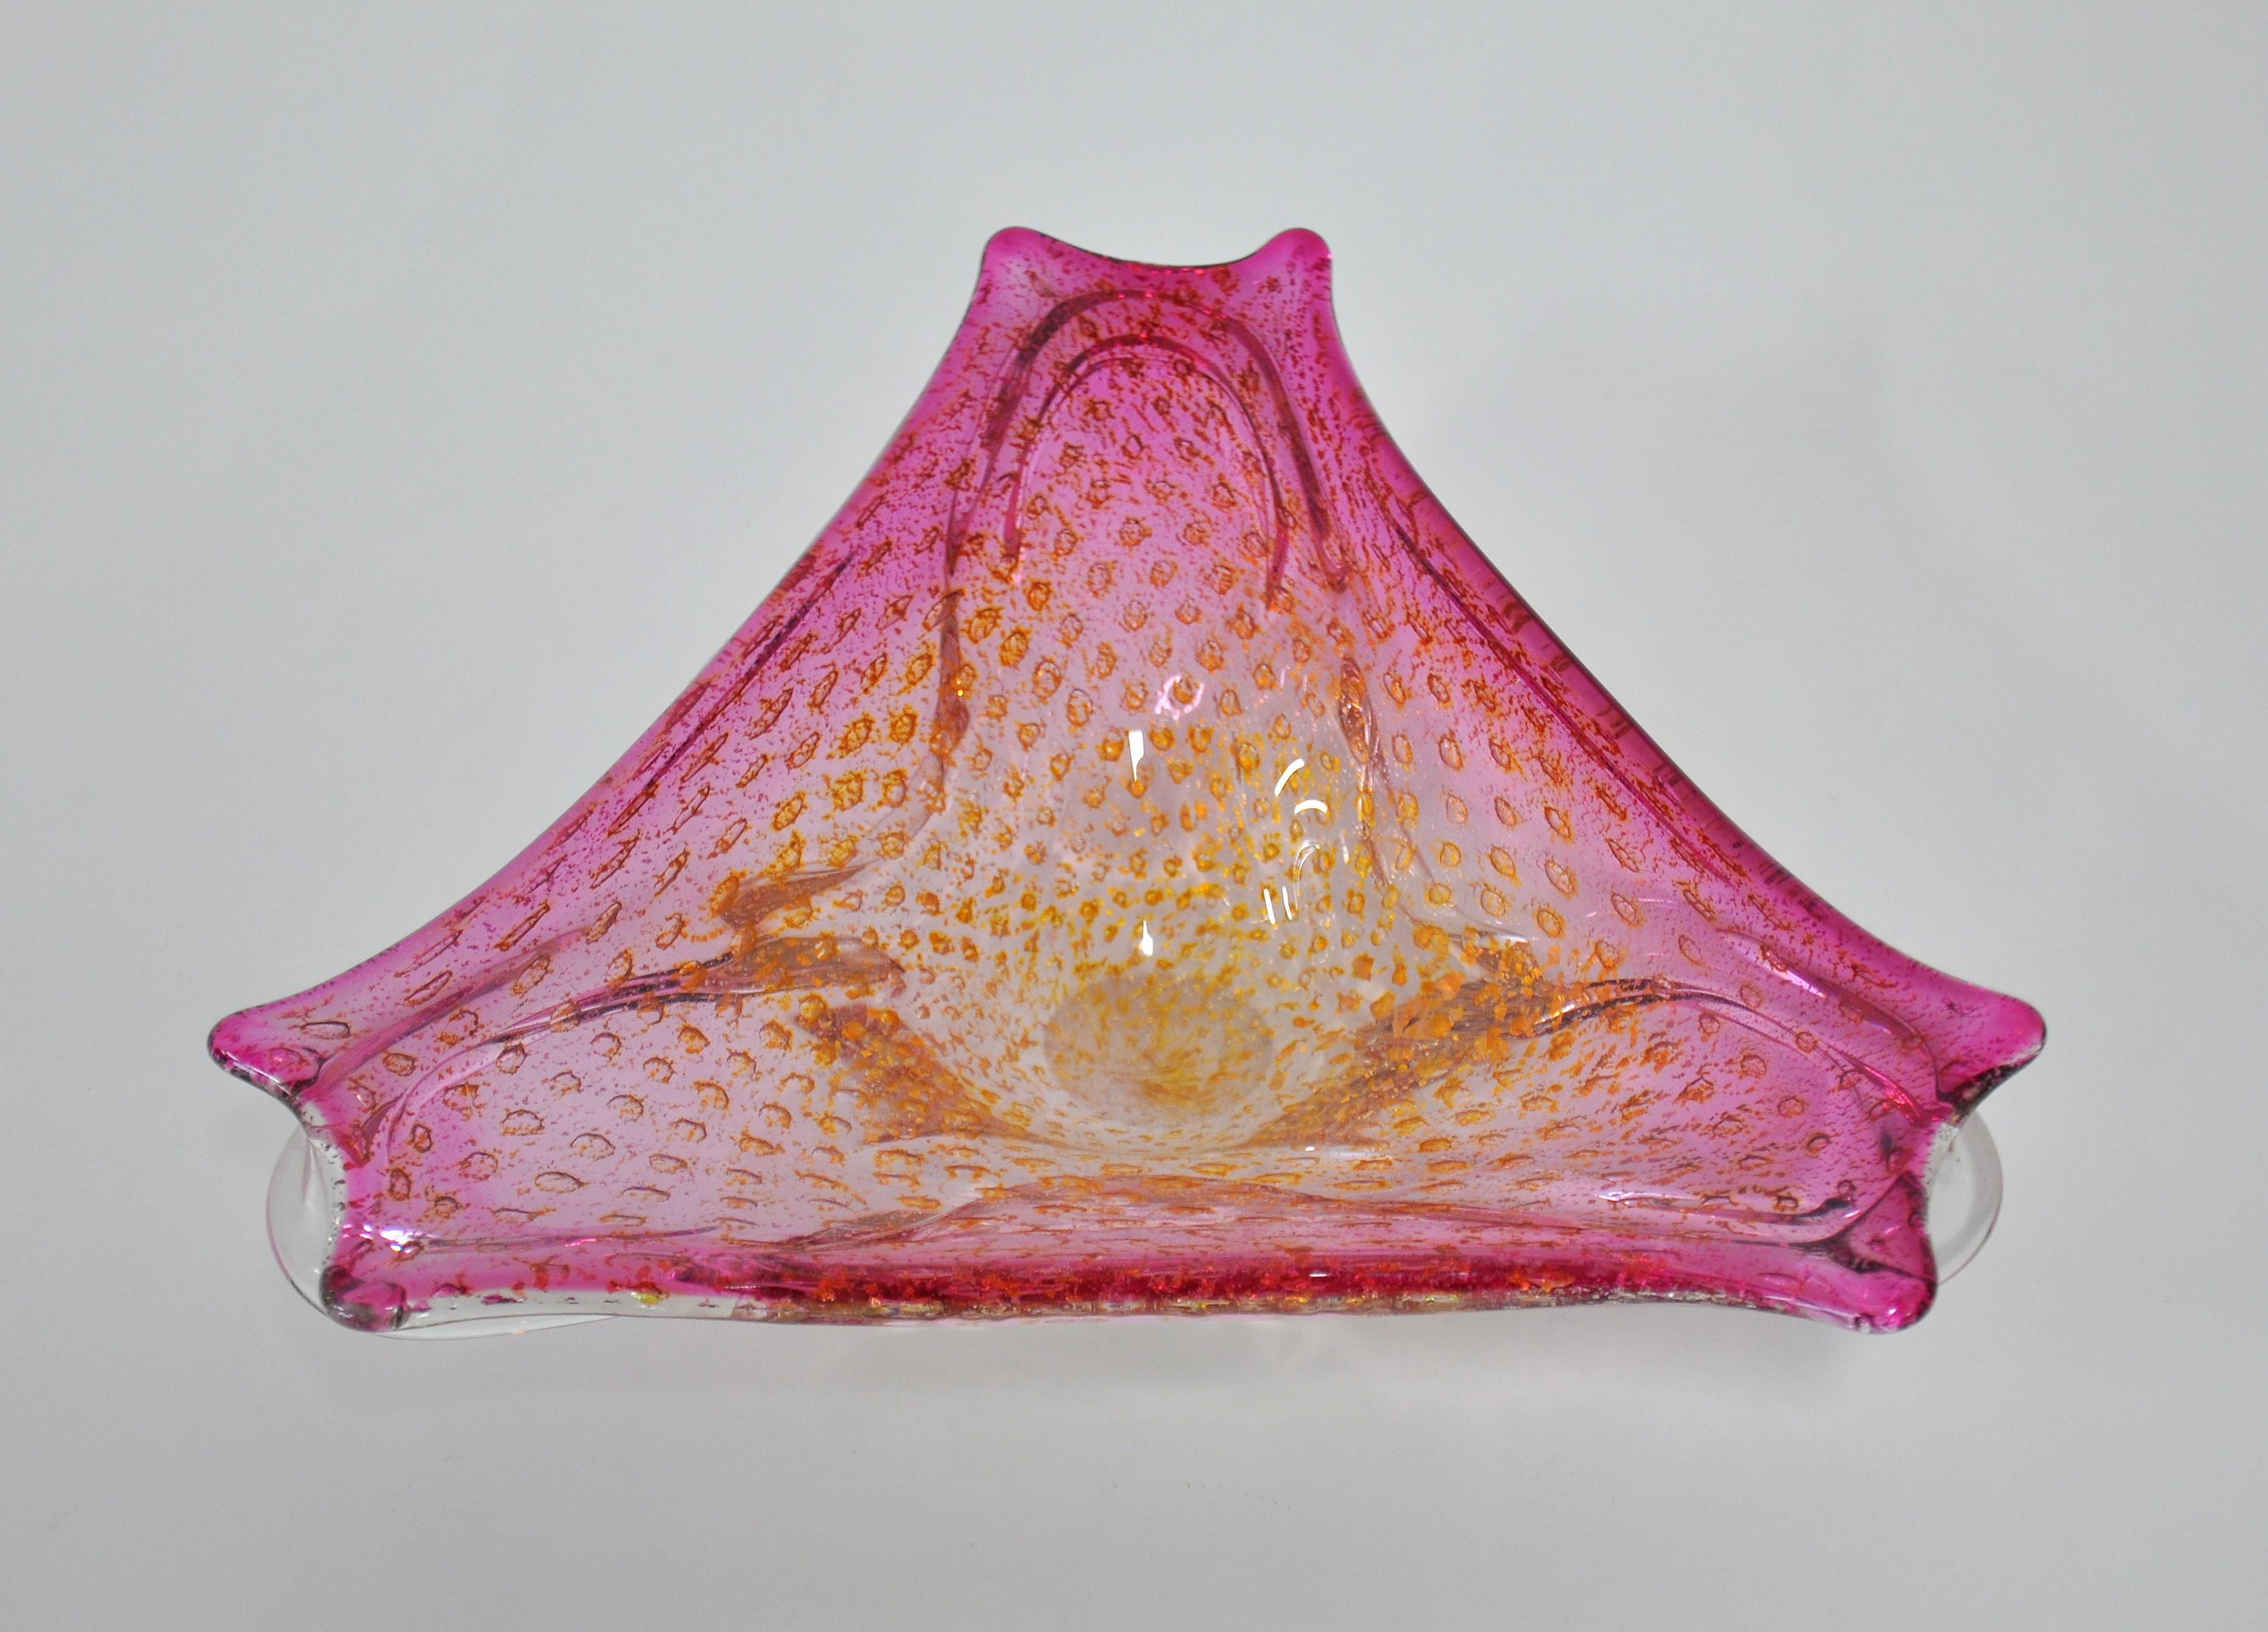 Vintage Mid-Century Modern Venetian hand blown glass bowl or ashtray with organic floral form. It features pink and clear glass, controlled bubble design, gold aventurine flecks, and pinched rims with flared sides. A great example of Italian